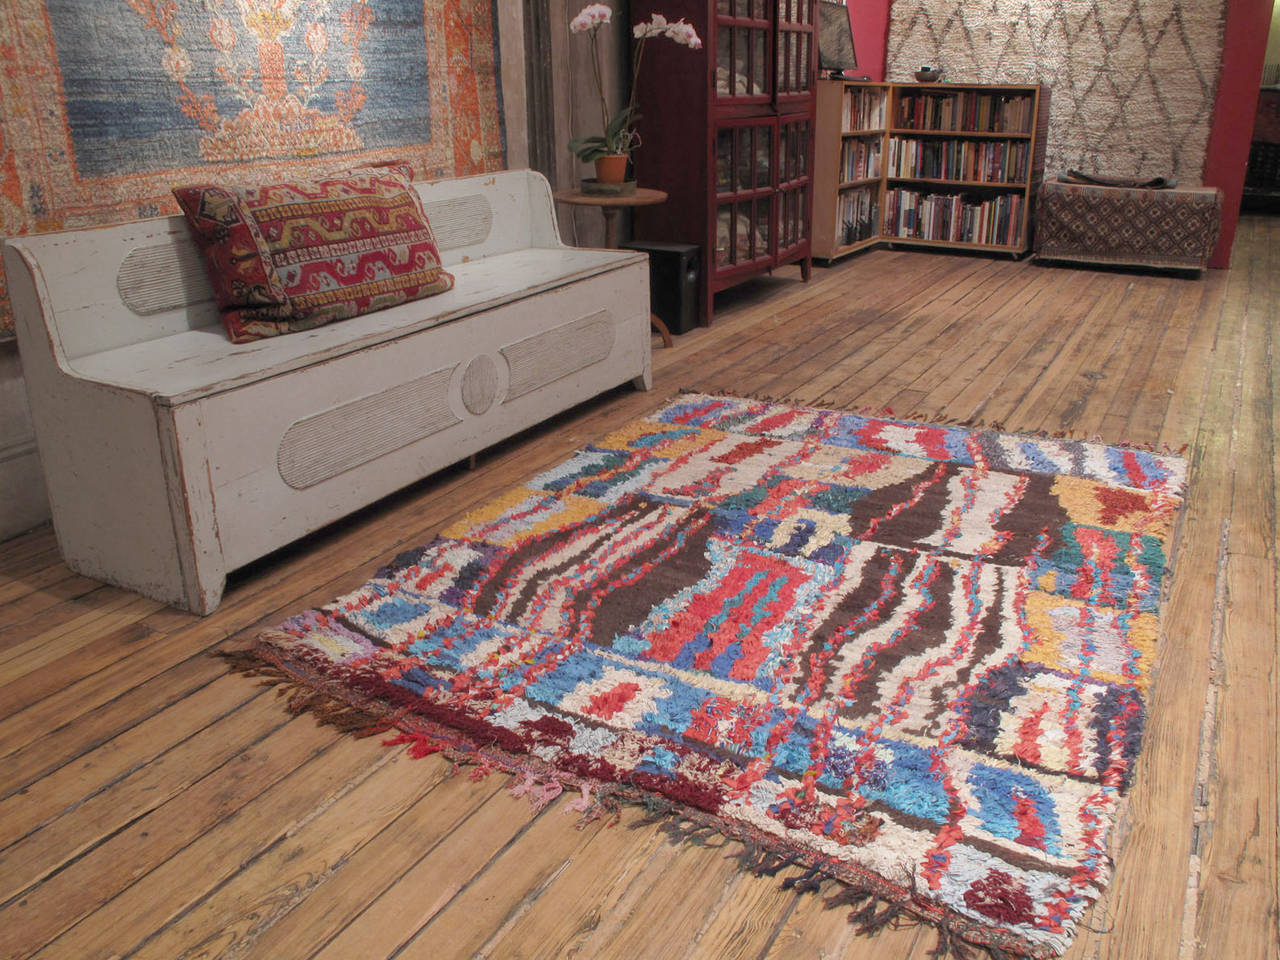 A Moroccan Berber rug from the Ourika Valley, woven with an ingenious mixture of wool, cotton and cut-up pieces of fabric from old clothes. A relatively recent phenomenon, such weavings are products of socio-economic changes in Moroccan society,